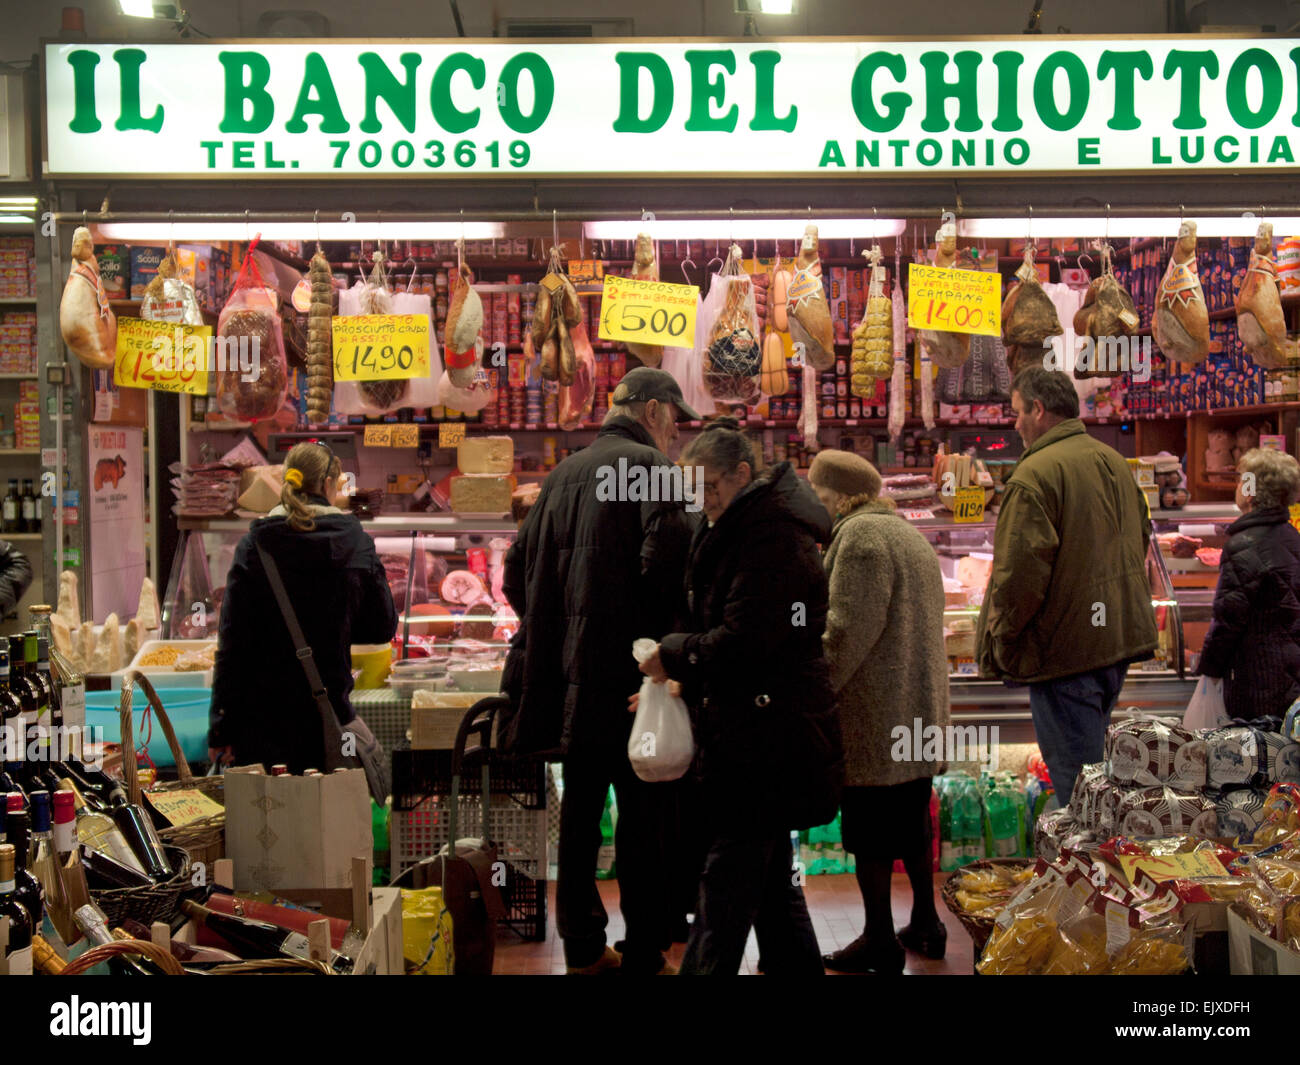 In a covered market in Rome, a store selling hams and cheeses Stock Photo